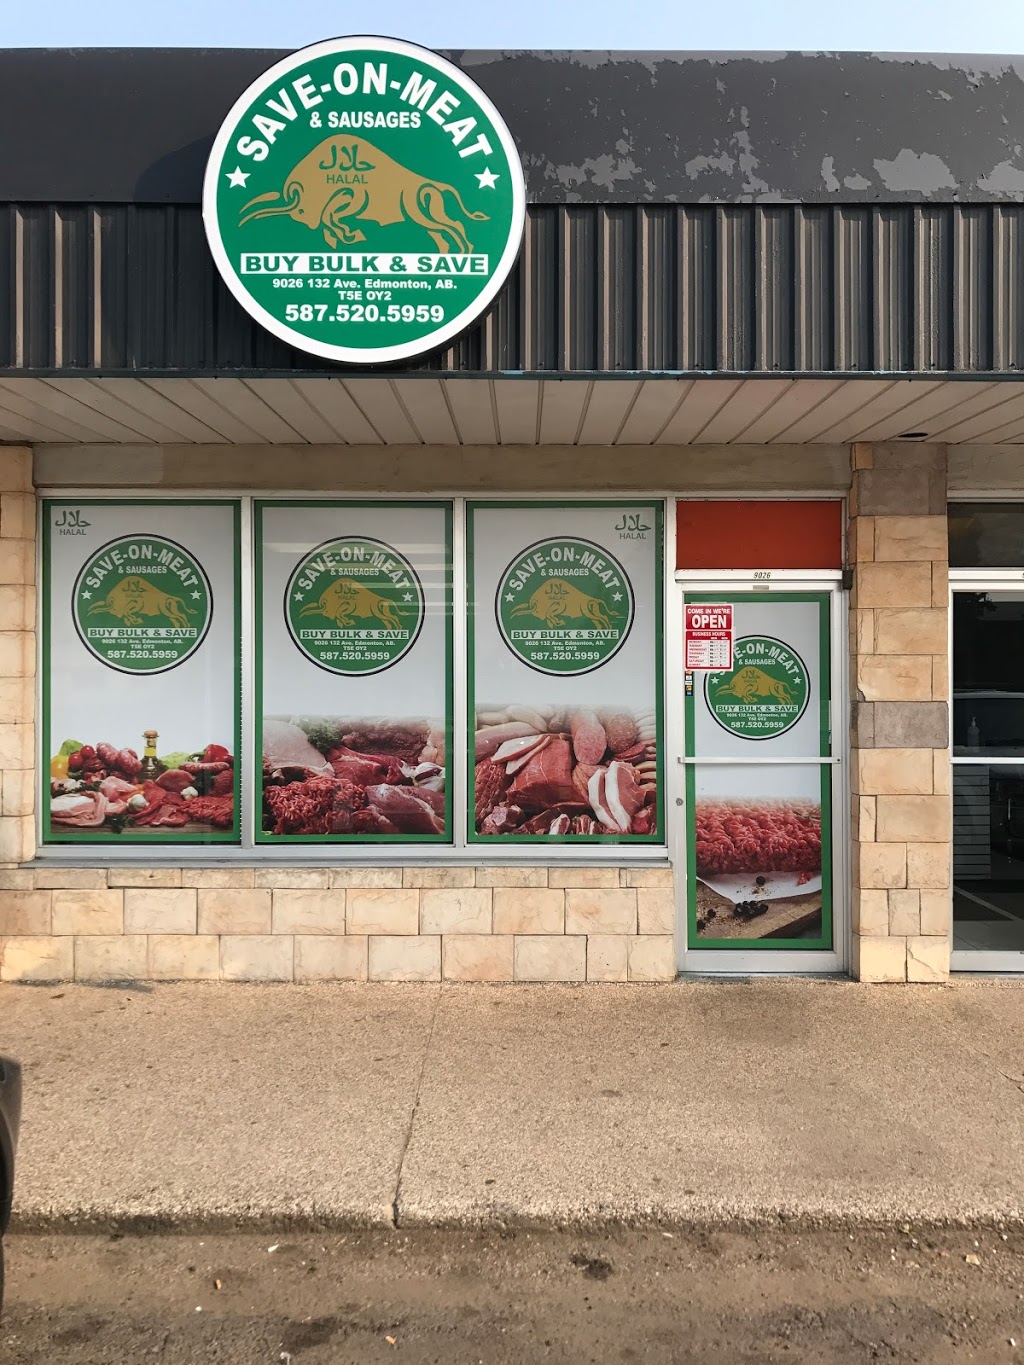 Save on Meat | 9026 132 Ave NW, Edmonton, AB T5E 0Y2, Canada | Phone: (587) 520-5959